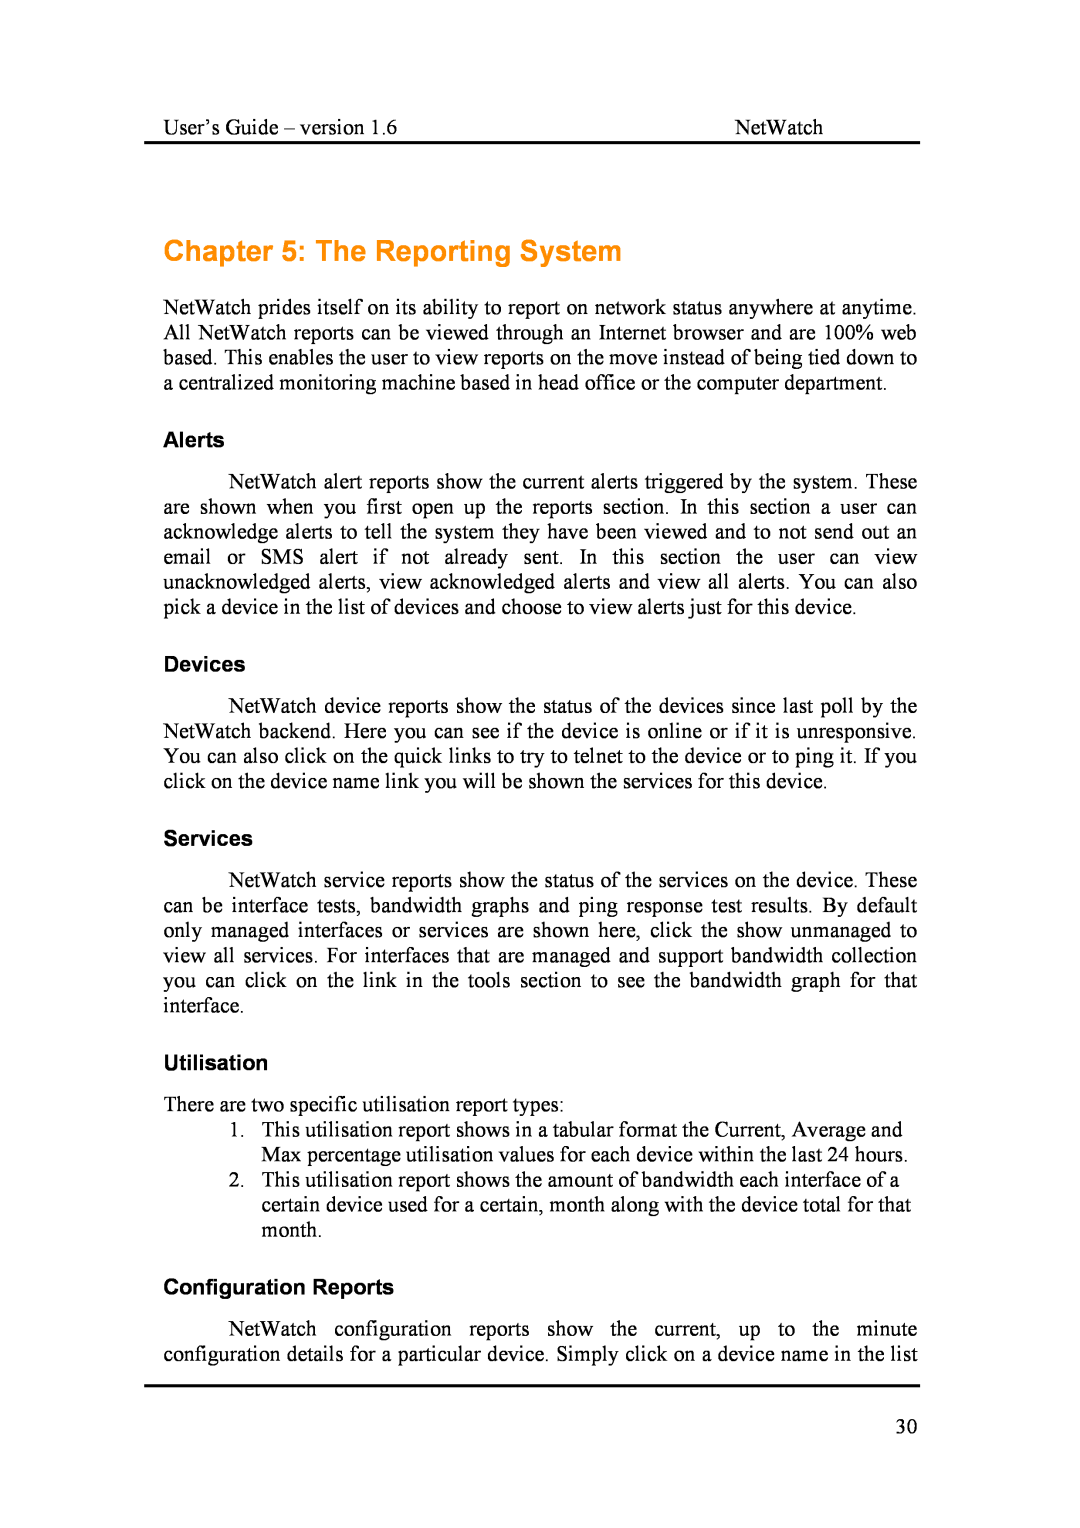 Fluke Network Router manual The Reporting System, Alerts, Devices, Services, Utilisation, Configuration Reports 